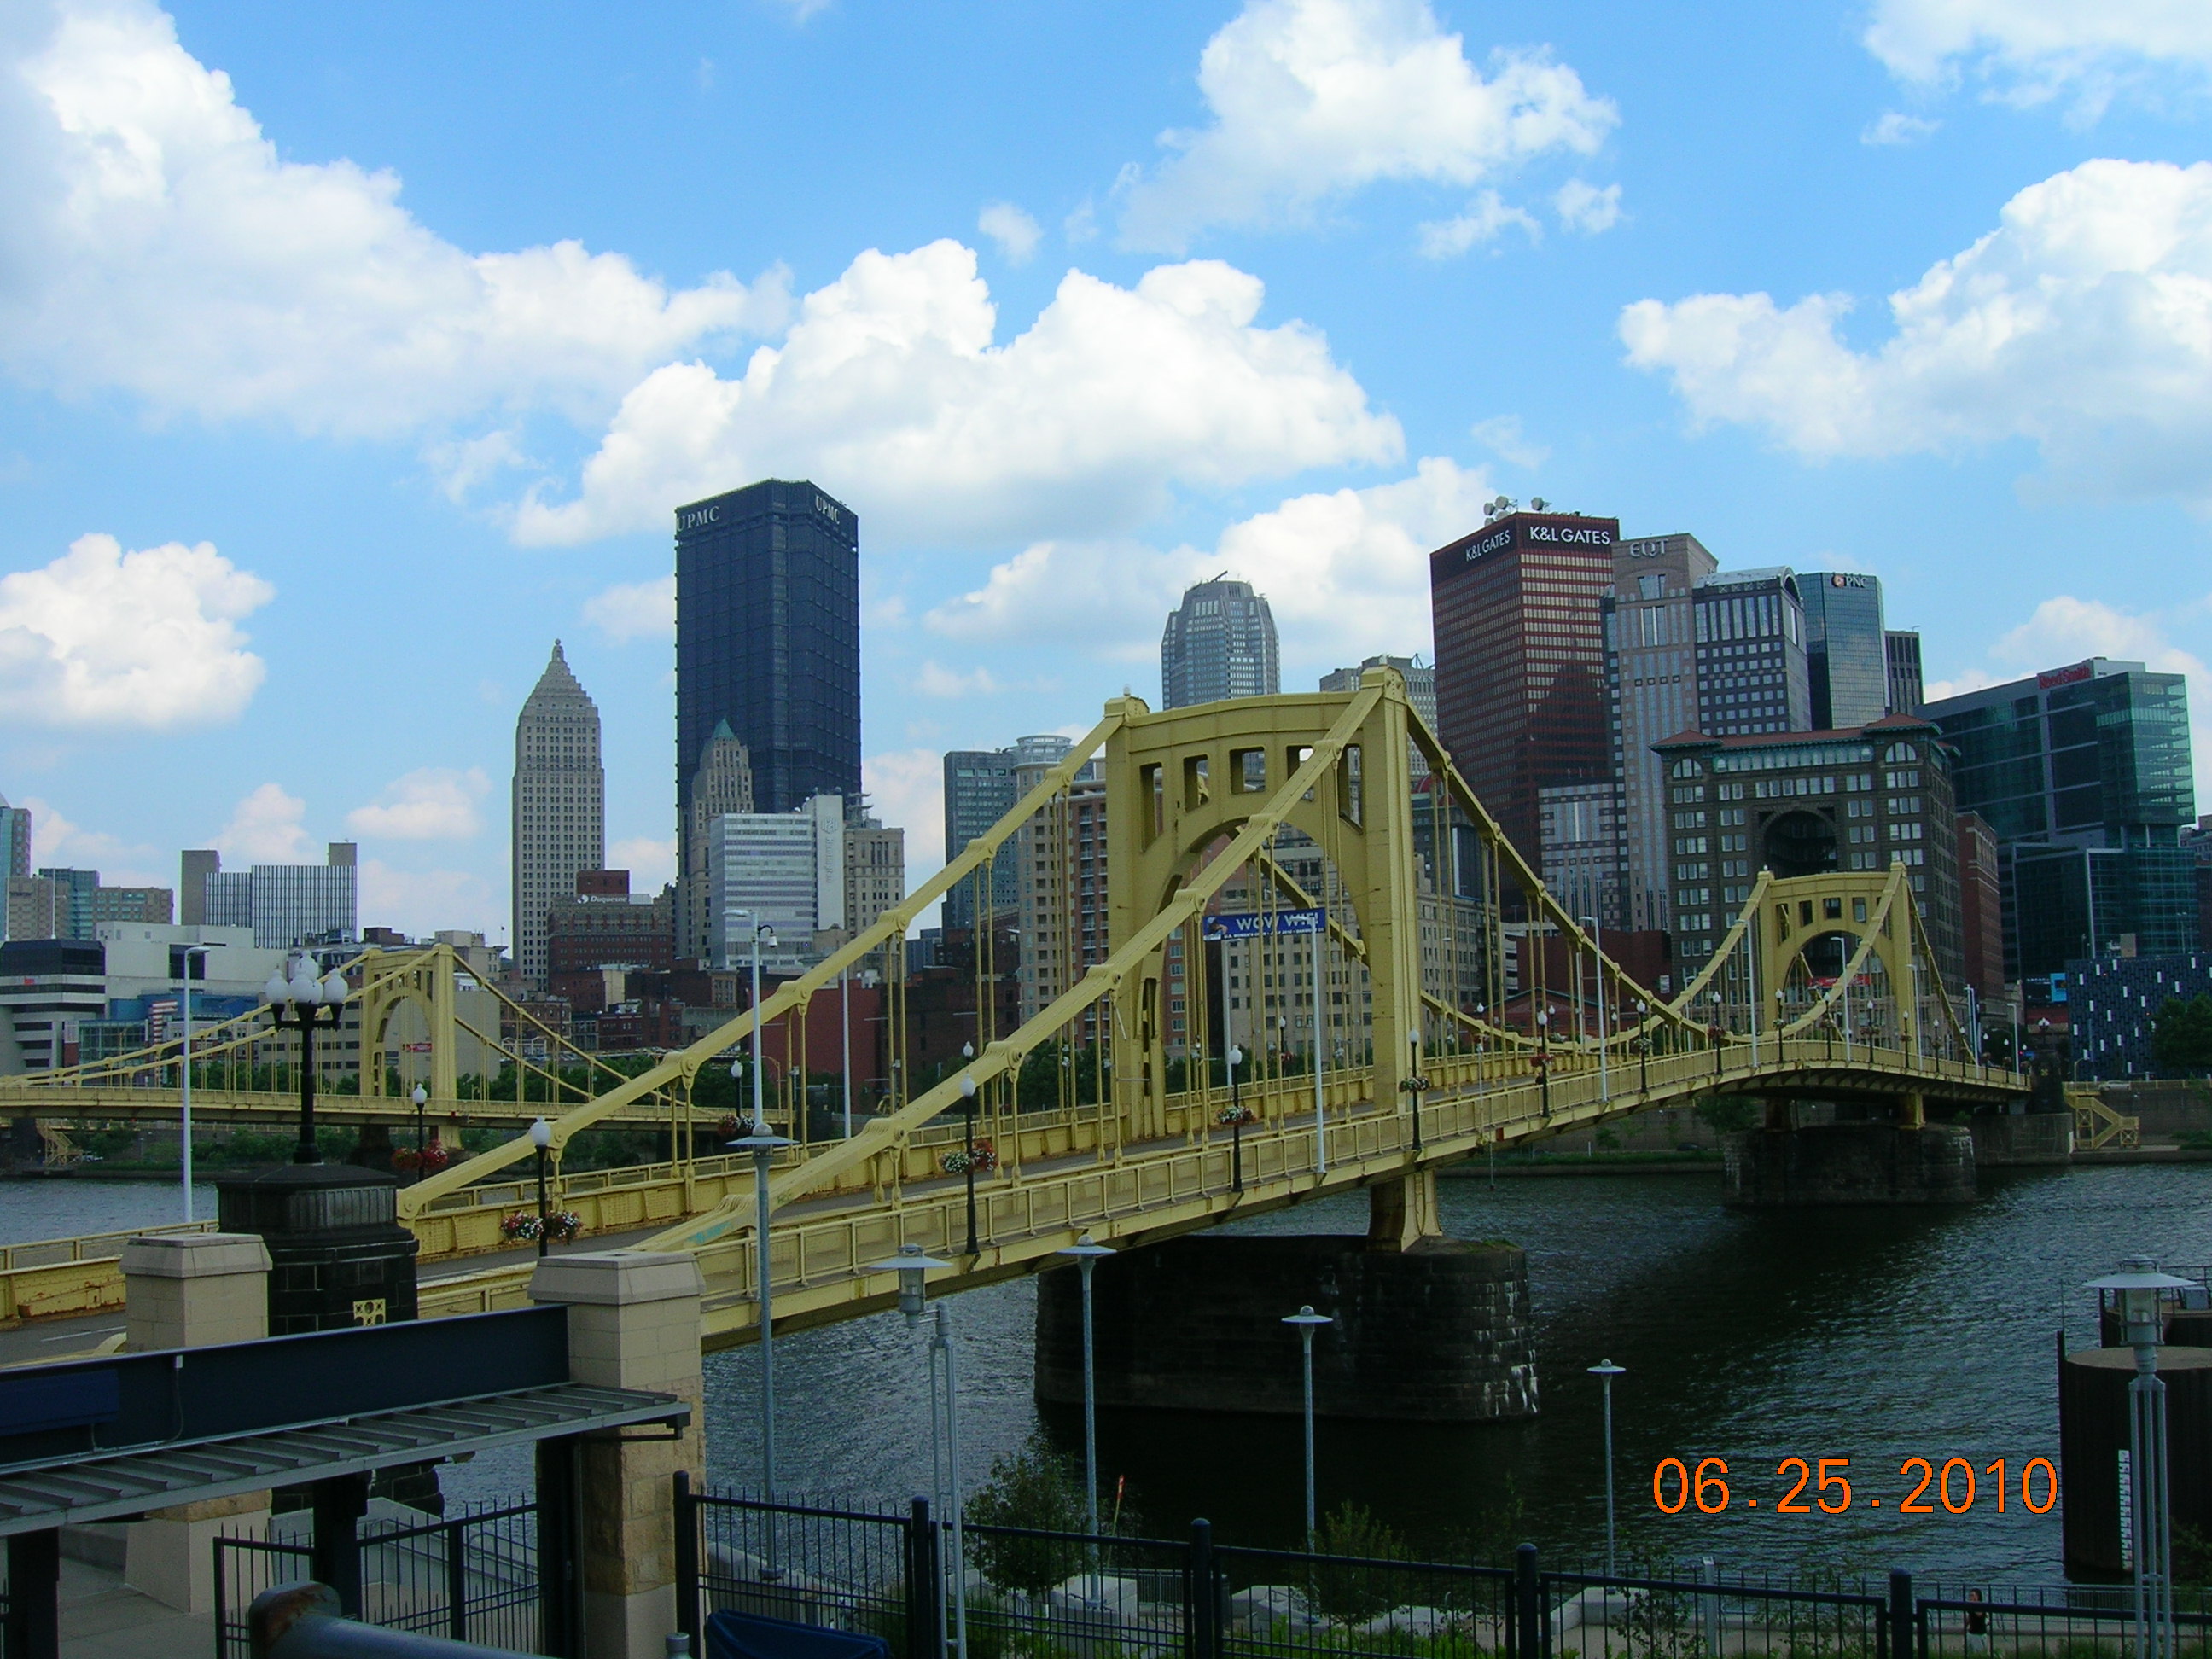 Pittsburgh from PNC Park open deck during our pre-planning visit in June
CLICK PIX TO ENLARGE